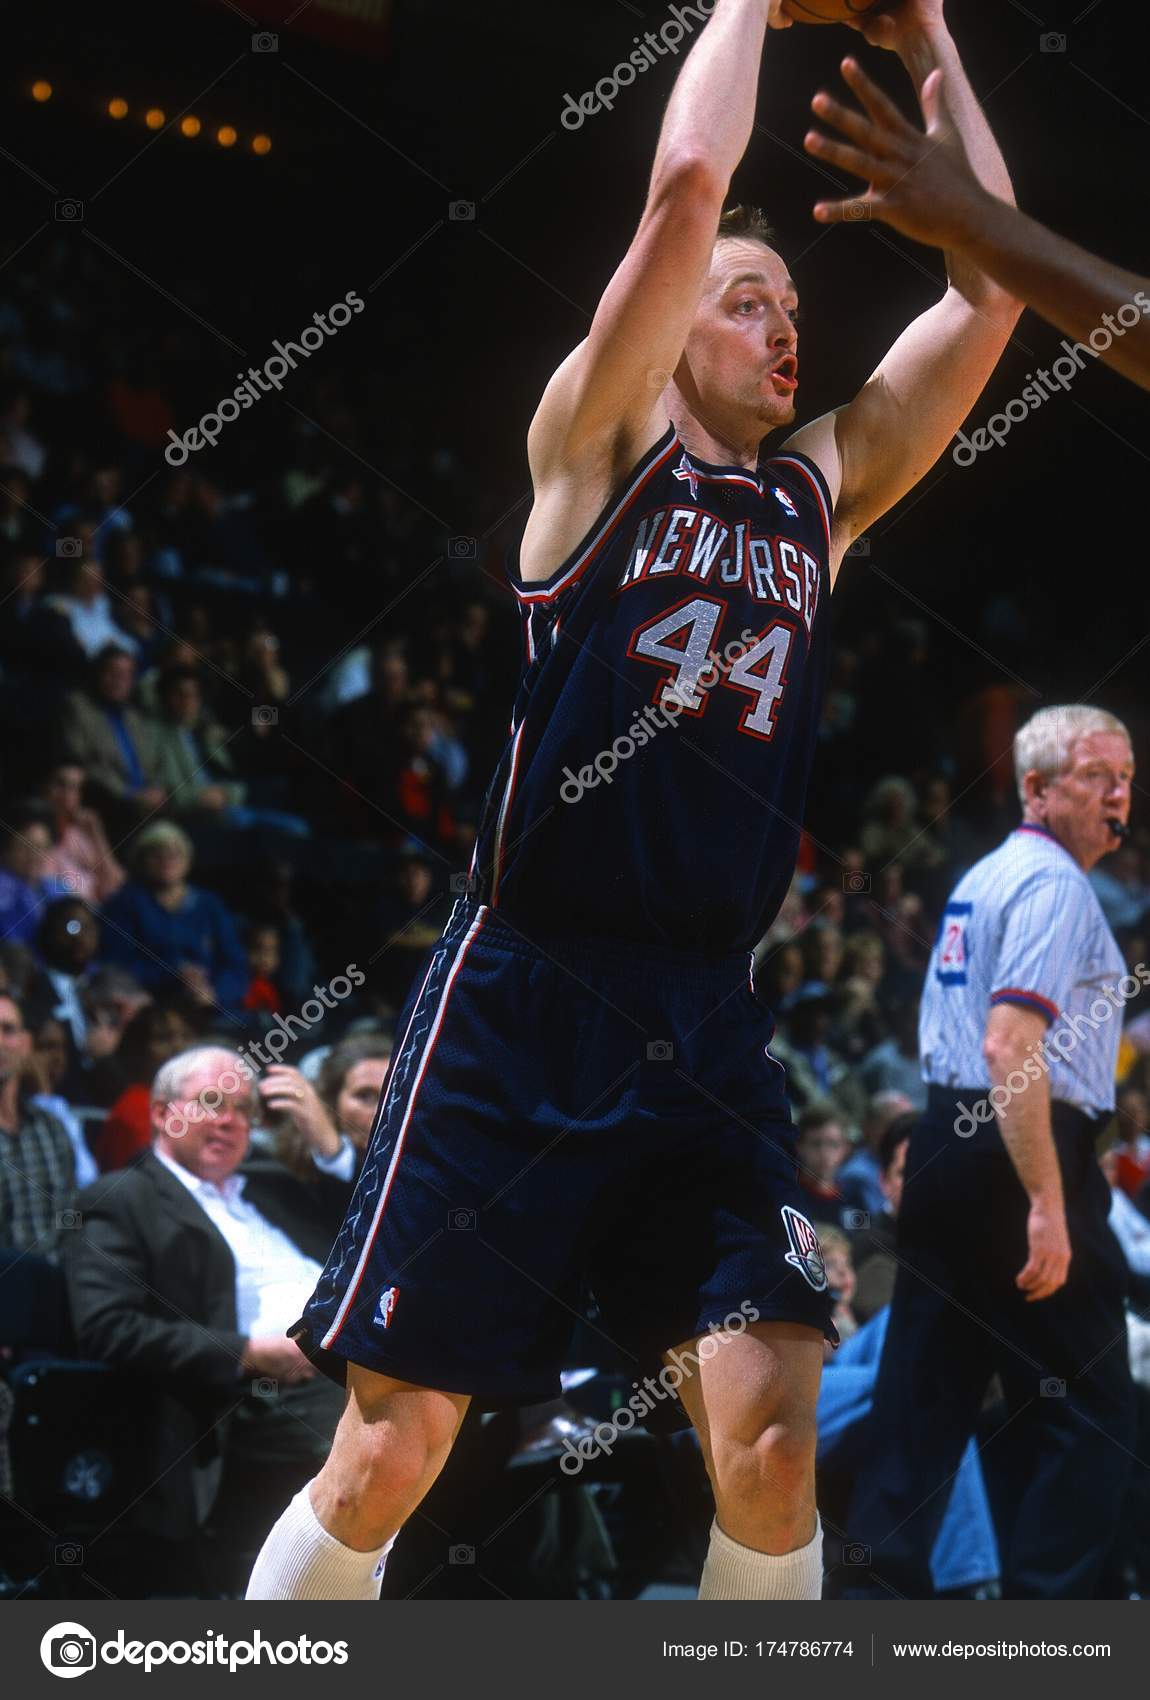 Where Is Former NBA Player Keith Van Horn Today?